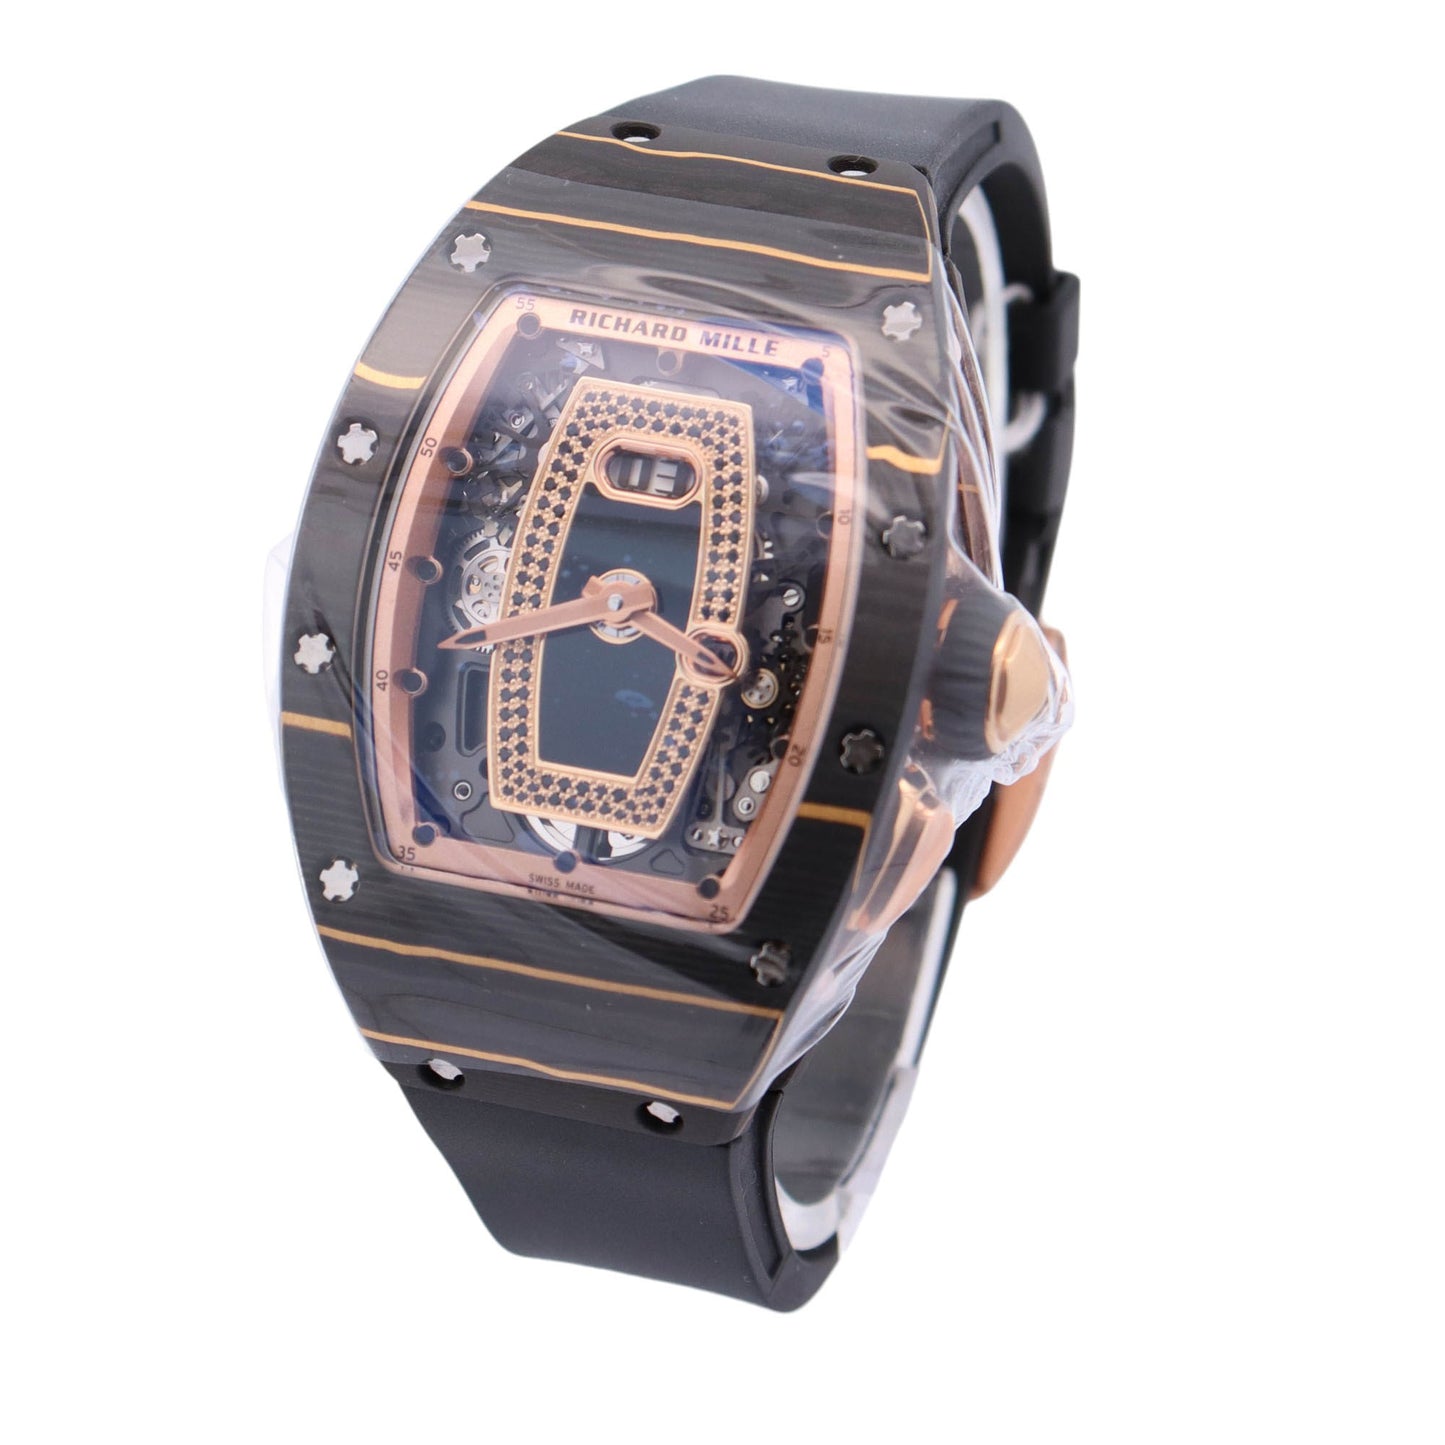 Richard Mille RM037 37mm Carbon TPT & Rose Gold Skeleton Dial Watch Ref# RM037 - Happy Jewelers Fine Jewelry Lifetime Warranty